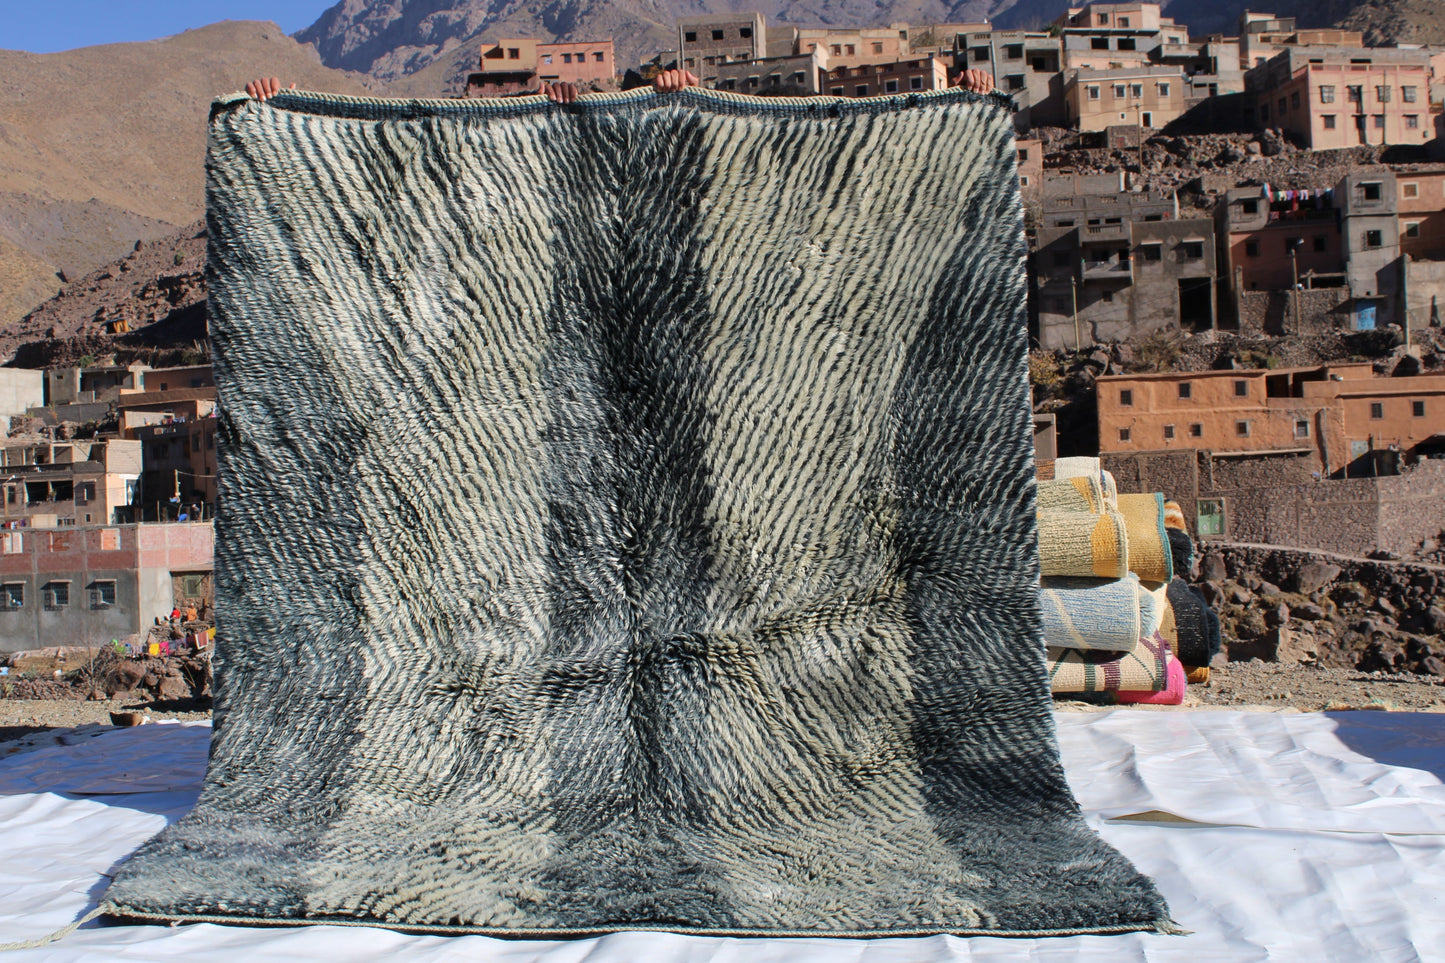 Beni Ourain rugs originate from the Atlas Mountains of Morocco and are characterized by their distinctive, neutral-toned, and geometric designs. These handwoven rugs often feature a plush pile and are made by the Berber tribes,  size is 254x190 cm